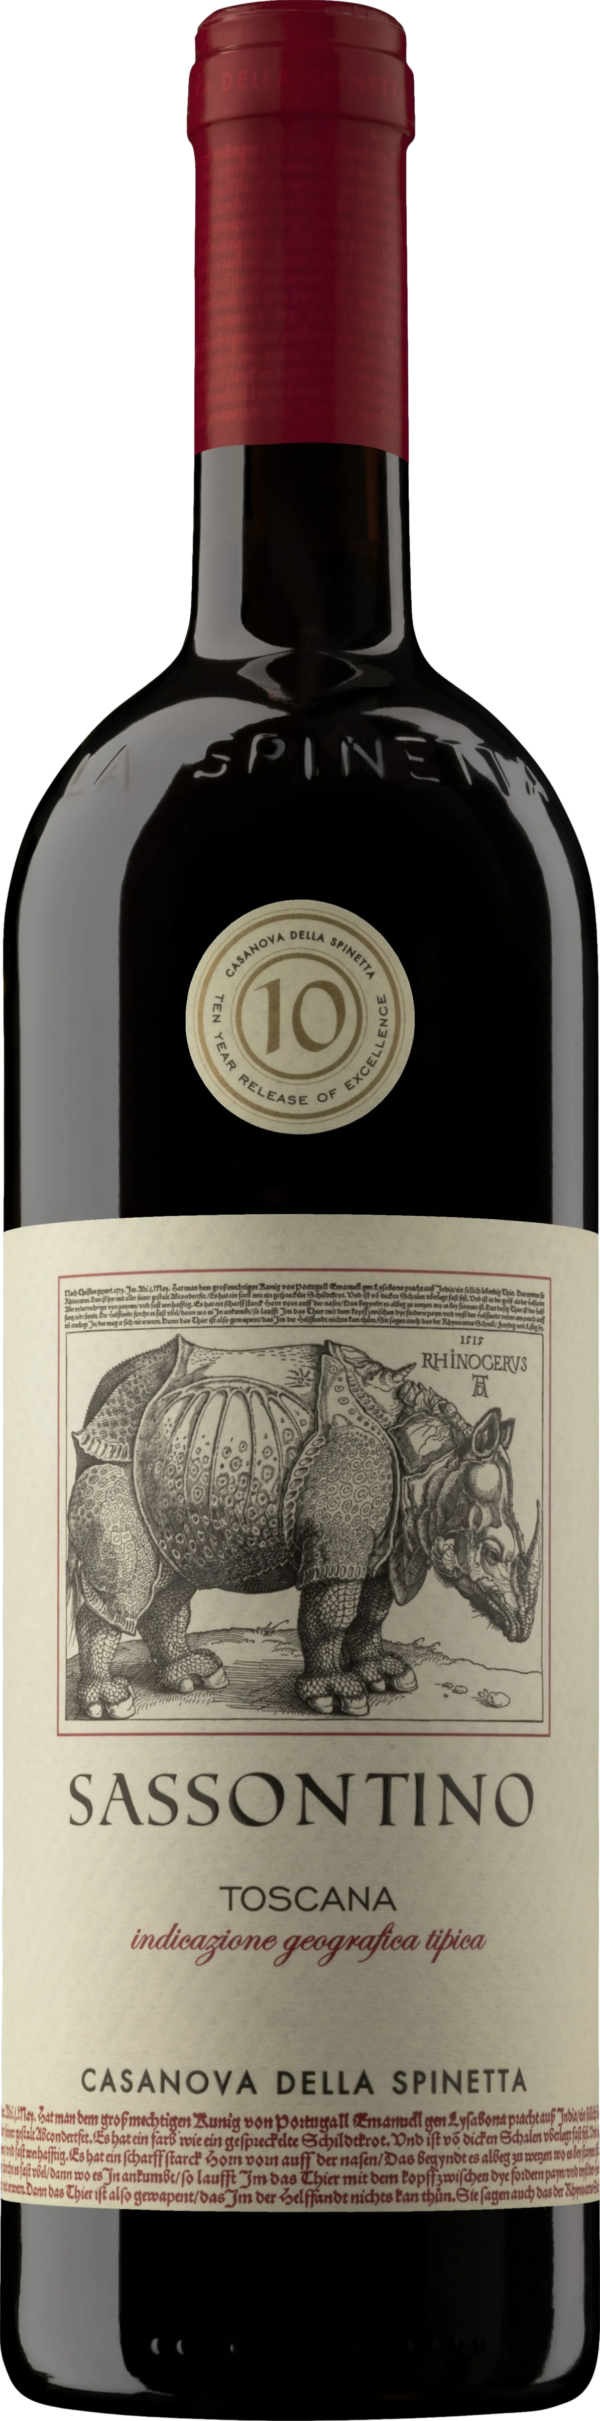 Product image of La Spinetta Sassontino 2007 from 8wines